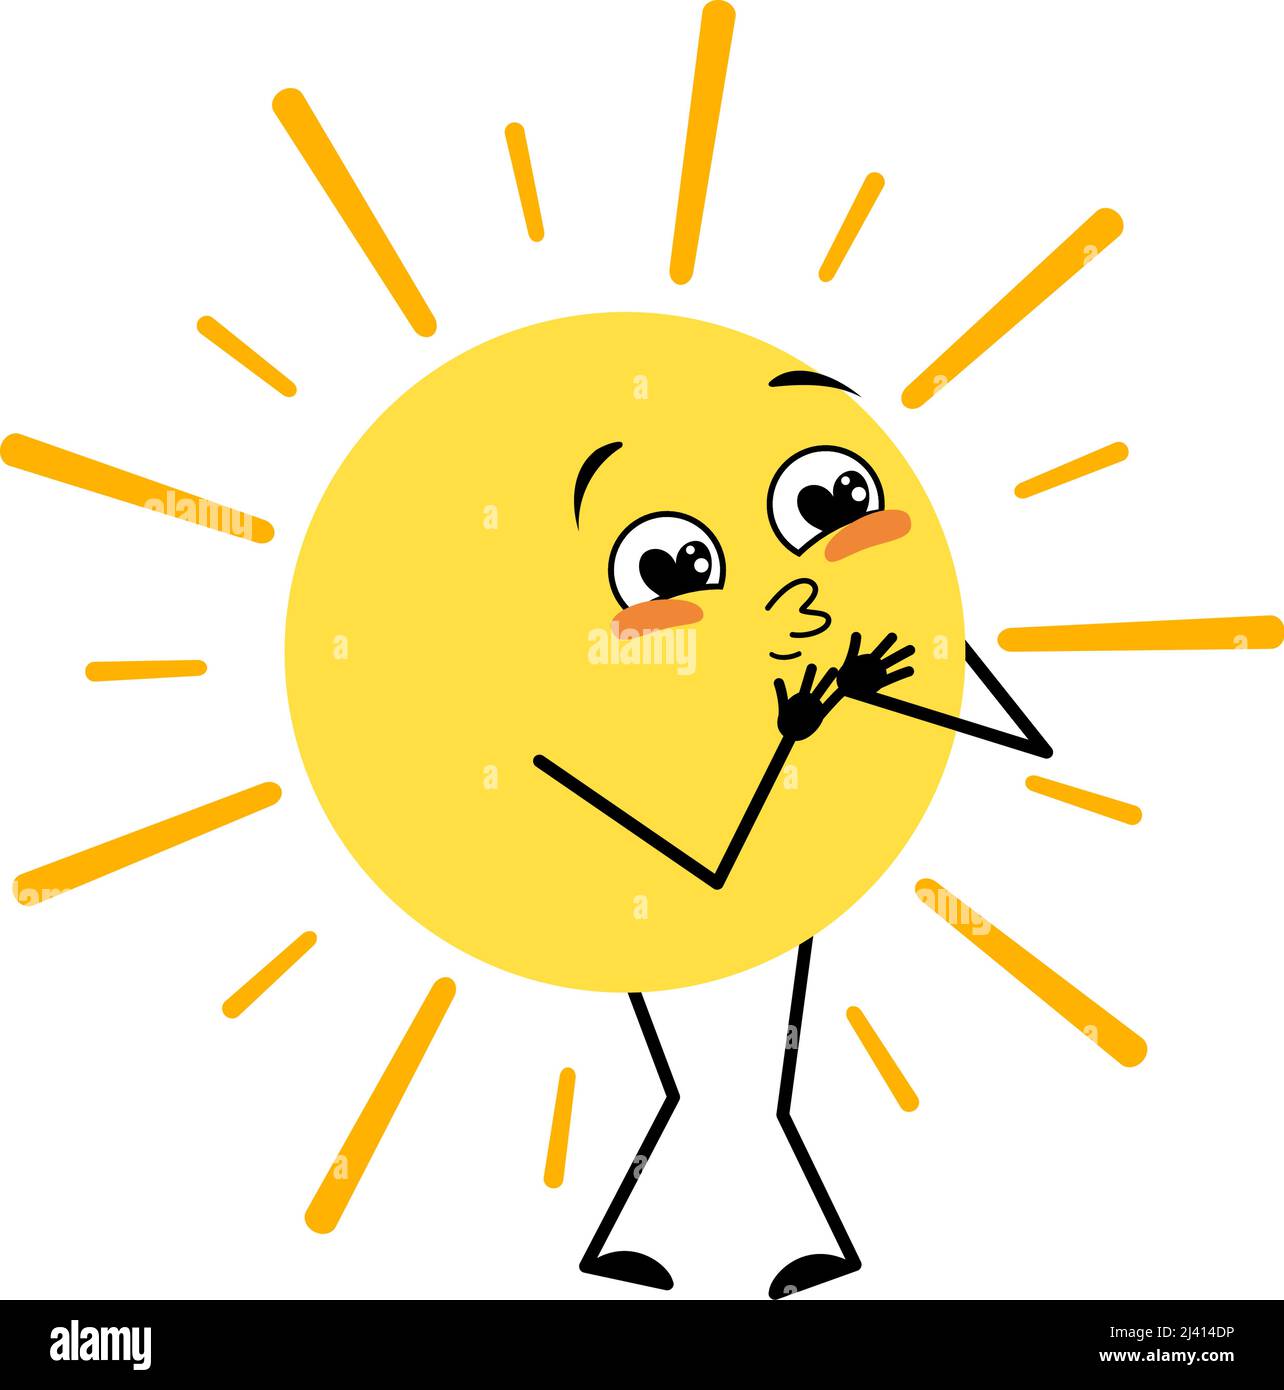 Cute sun character with love emotions, happy face, smile, arms and legs. Person with happy expression and pose. Vector flat illustration Stock Vector